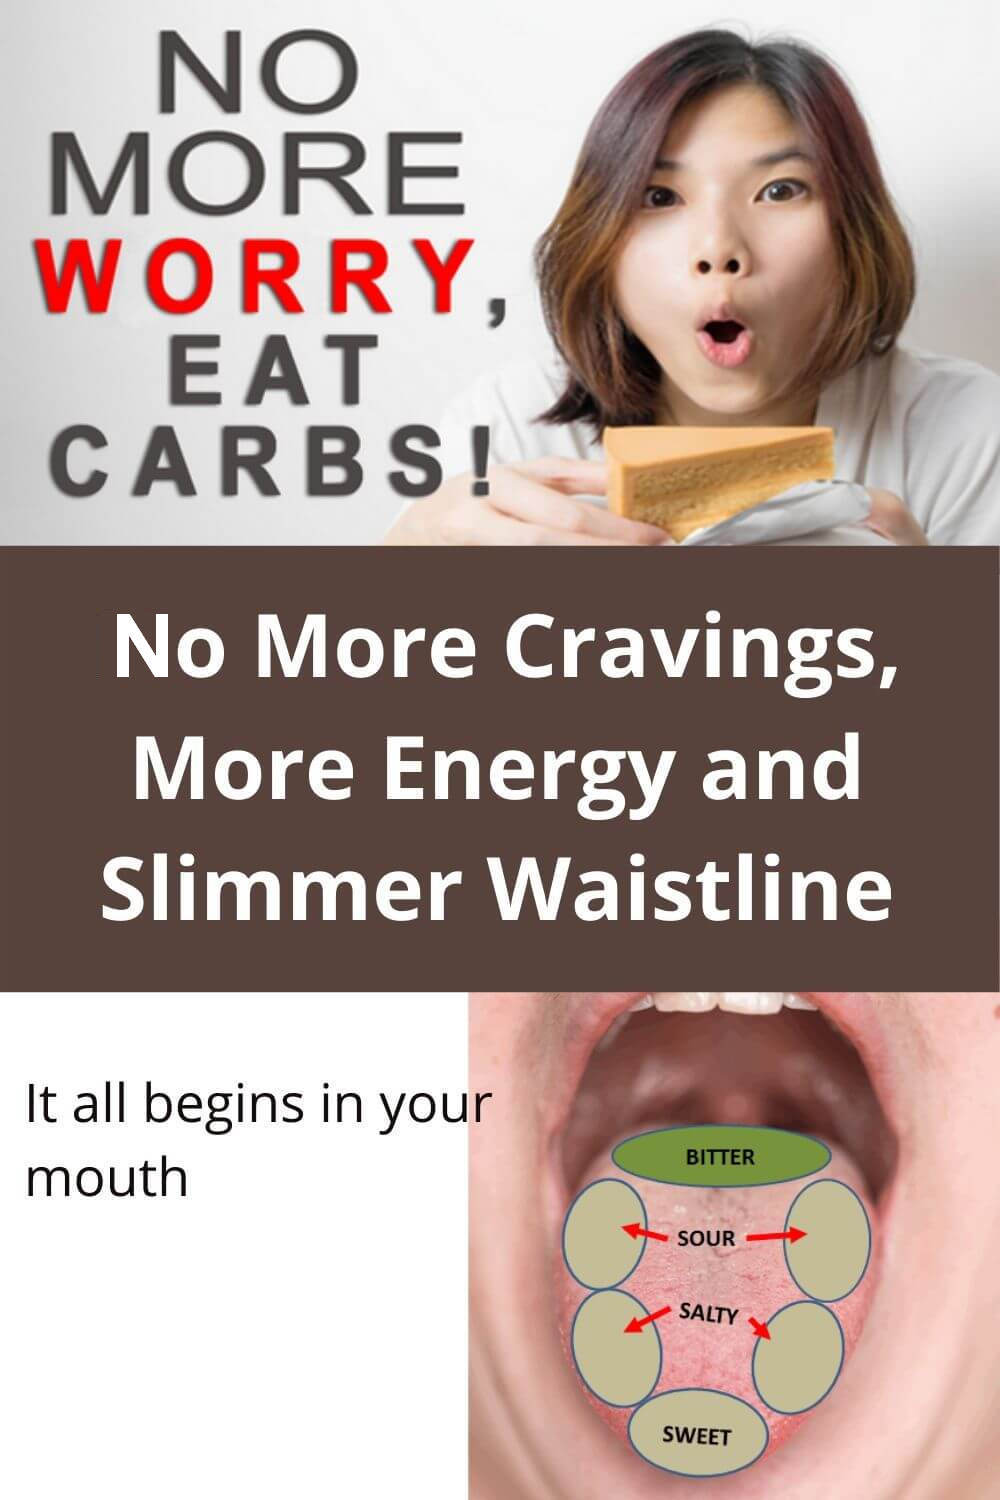 No more craving, more energy and slimmer waistline